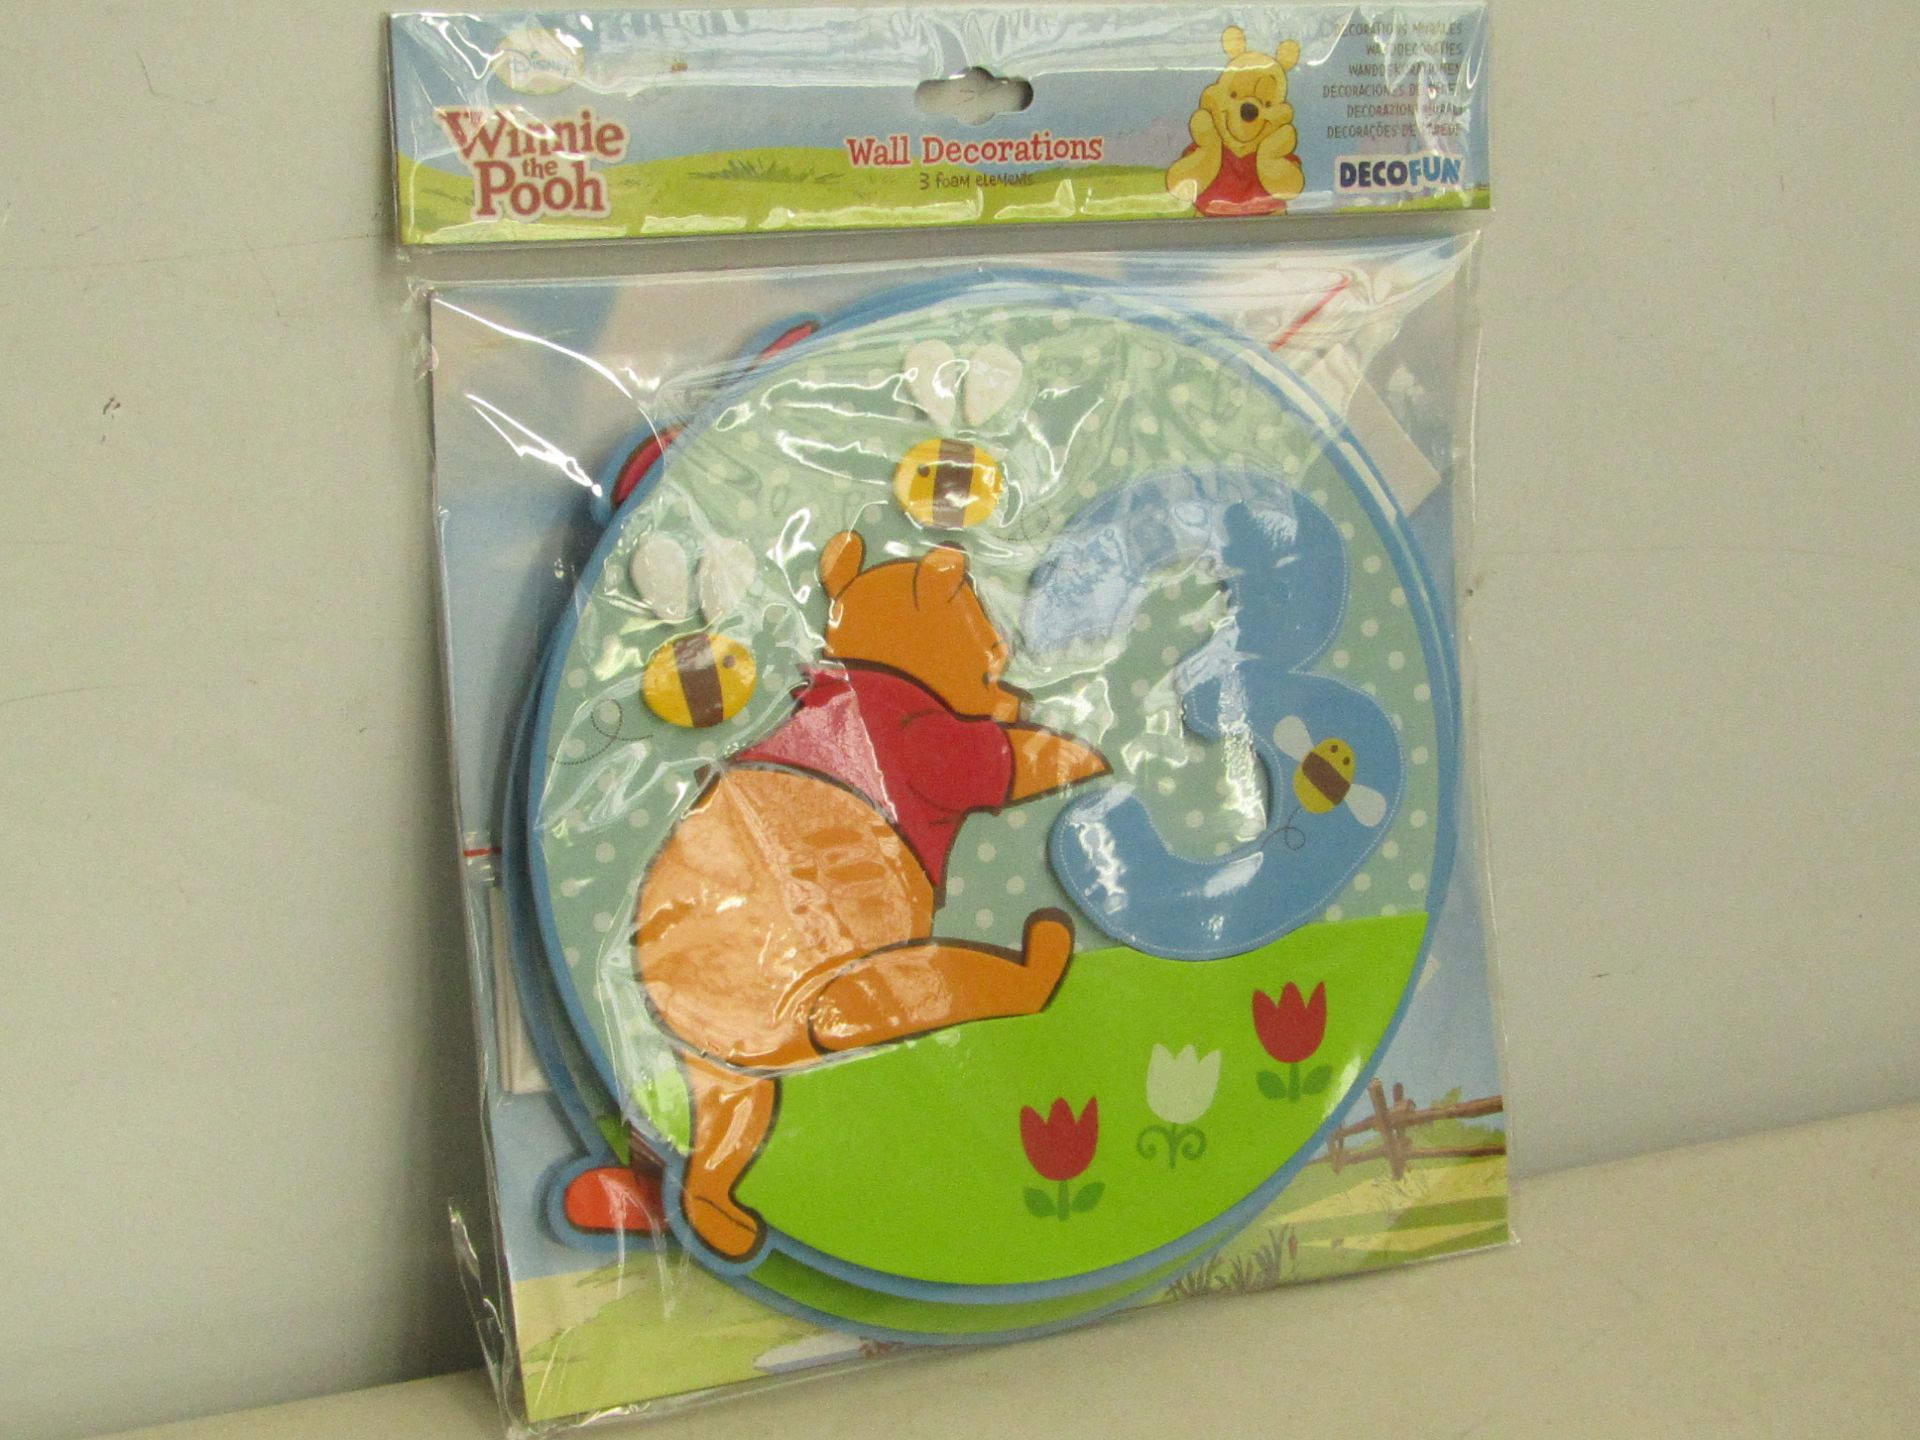 16x packs each containing 3 Winnie the Pooh wall decorations. All new in packaging.